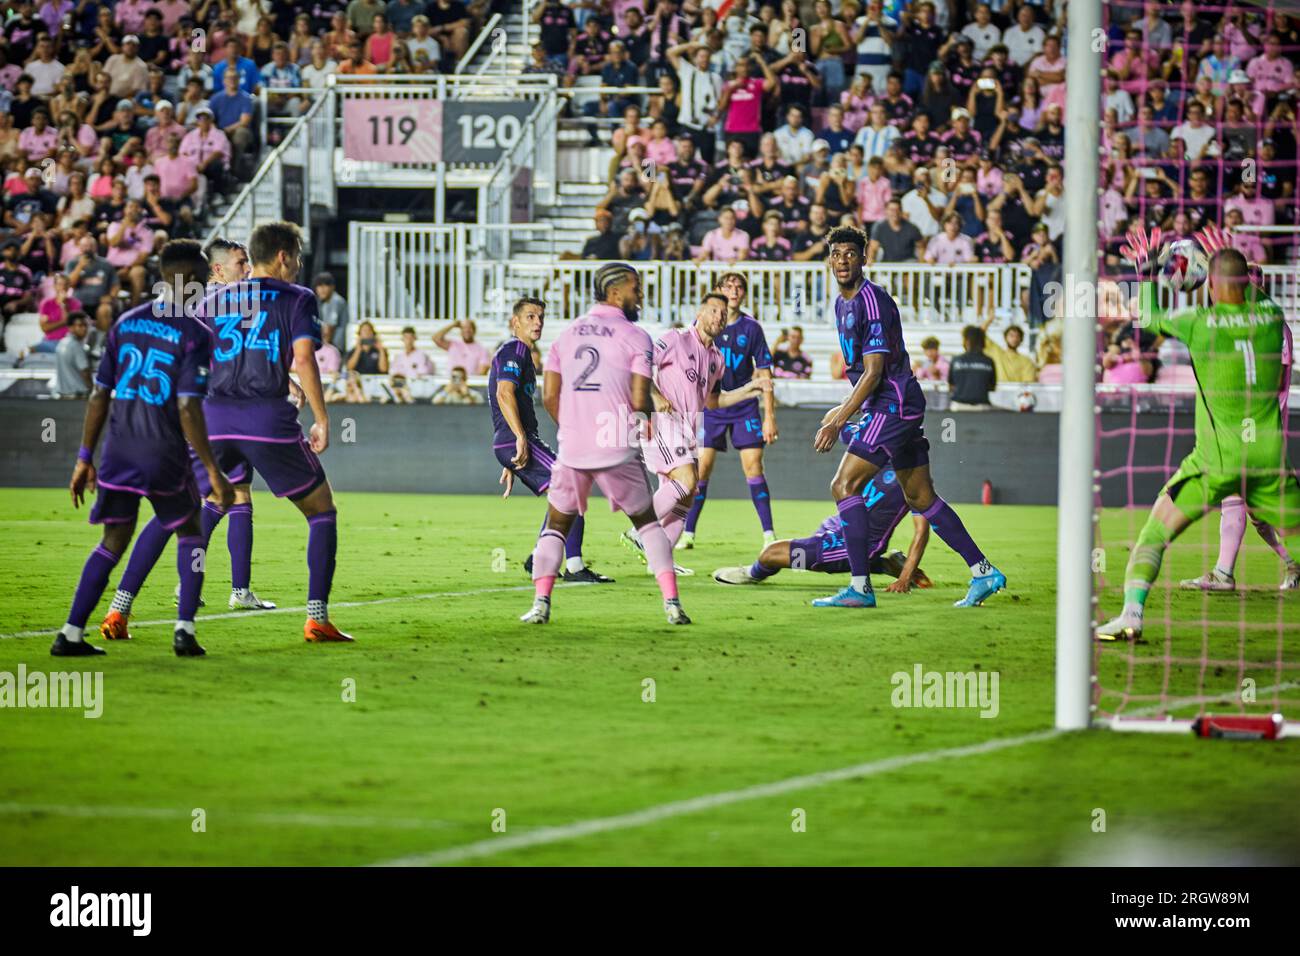 Fort Lauderdale, FL, USA. 11th August 2023. 10-Lionel Messi of Inter Miami, 2-DeAndre Yedlin of Inter Miami, 1-K. Kahlina of Charlotte during the match Charlotte FC vs. Inter Miami CF at DRV Pink Stadium in Florida, USA. Credit: Yaroslav Sabitov/YES Market Media/Alamy Live News Stock Photo